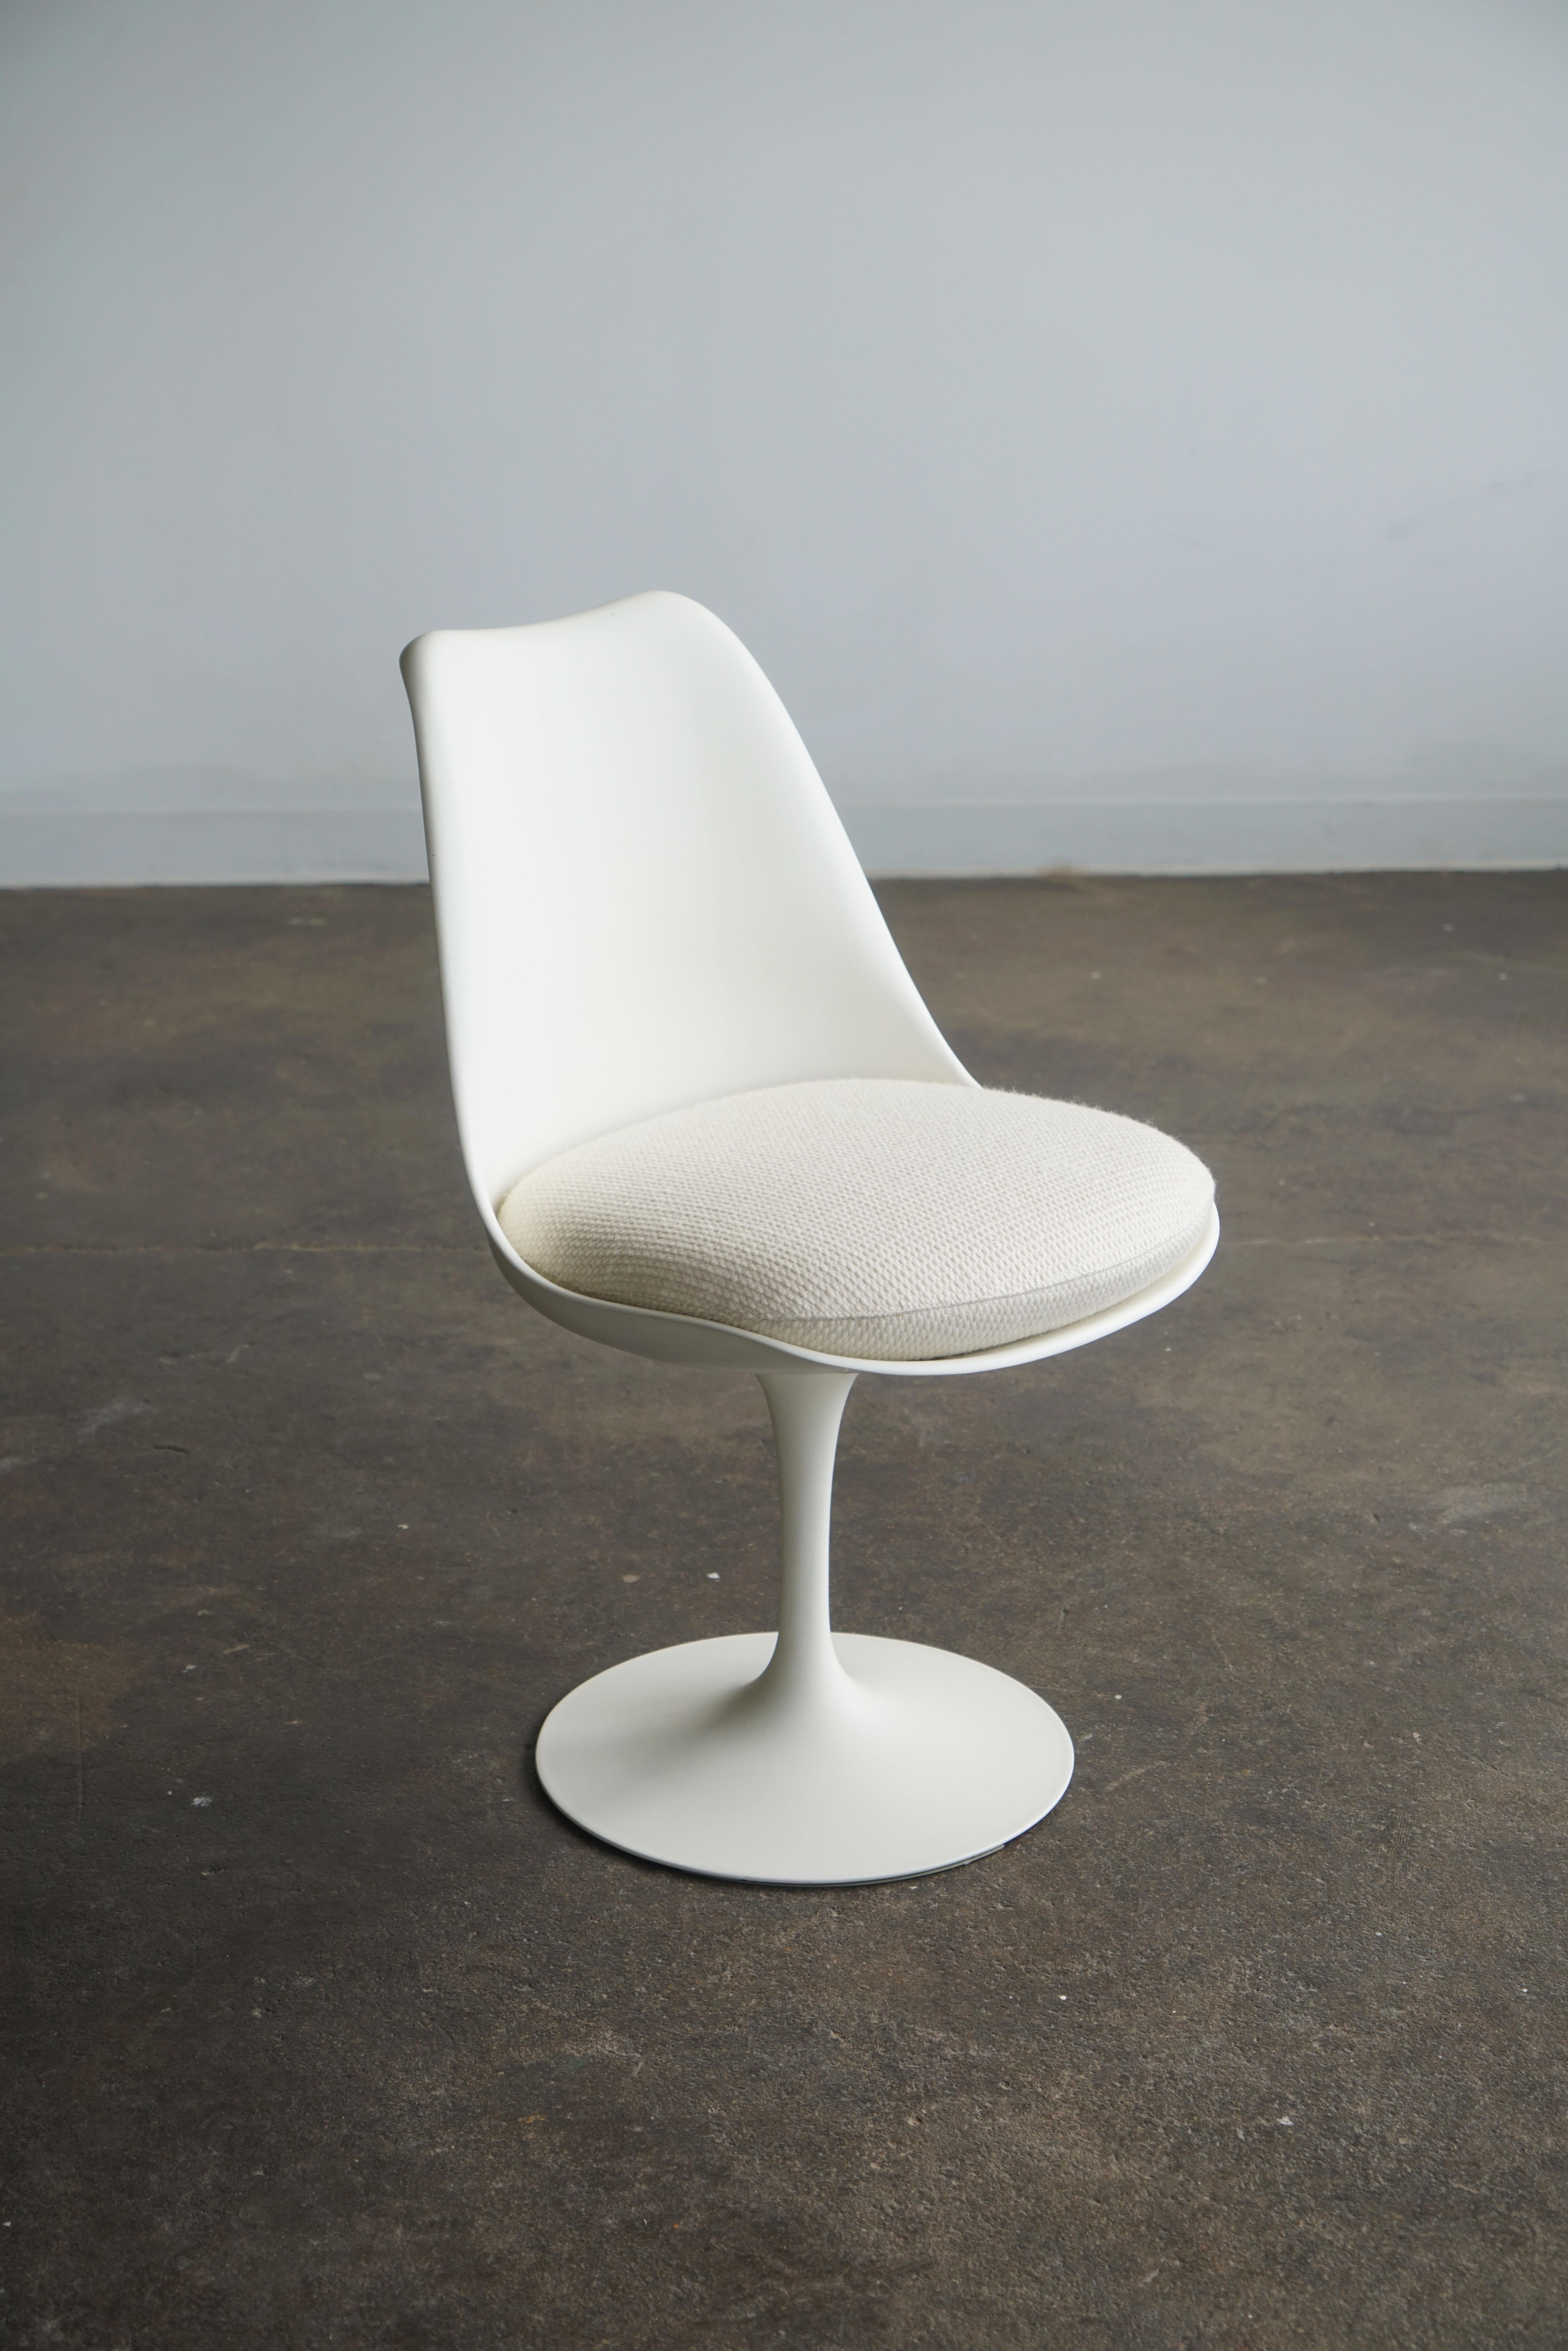 Late 20th Century 1960's Eero Saarinen Tulip dining chairs for Knoll, set of 4 upholstered For Sale